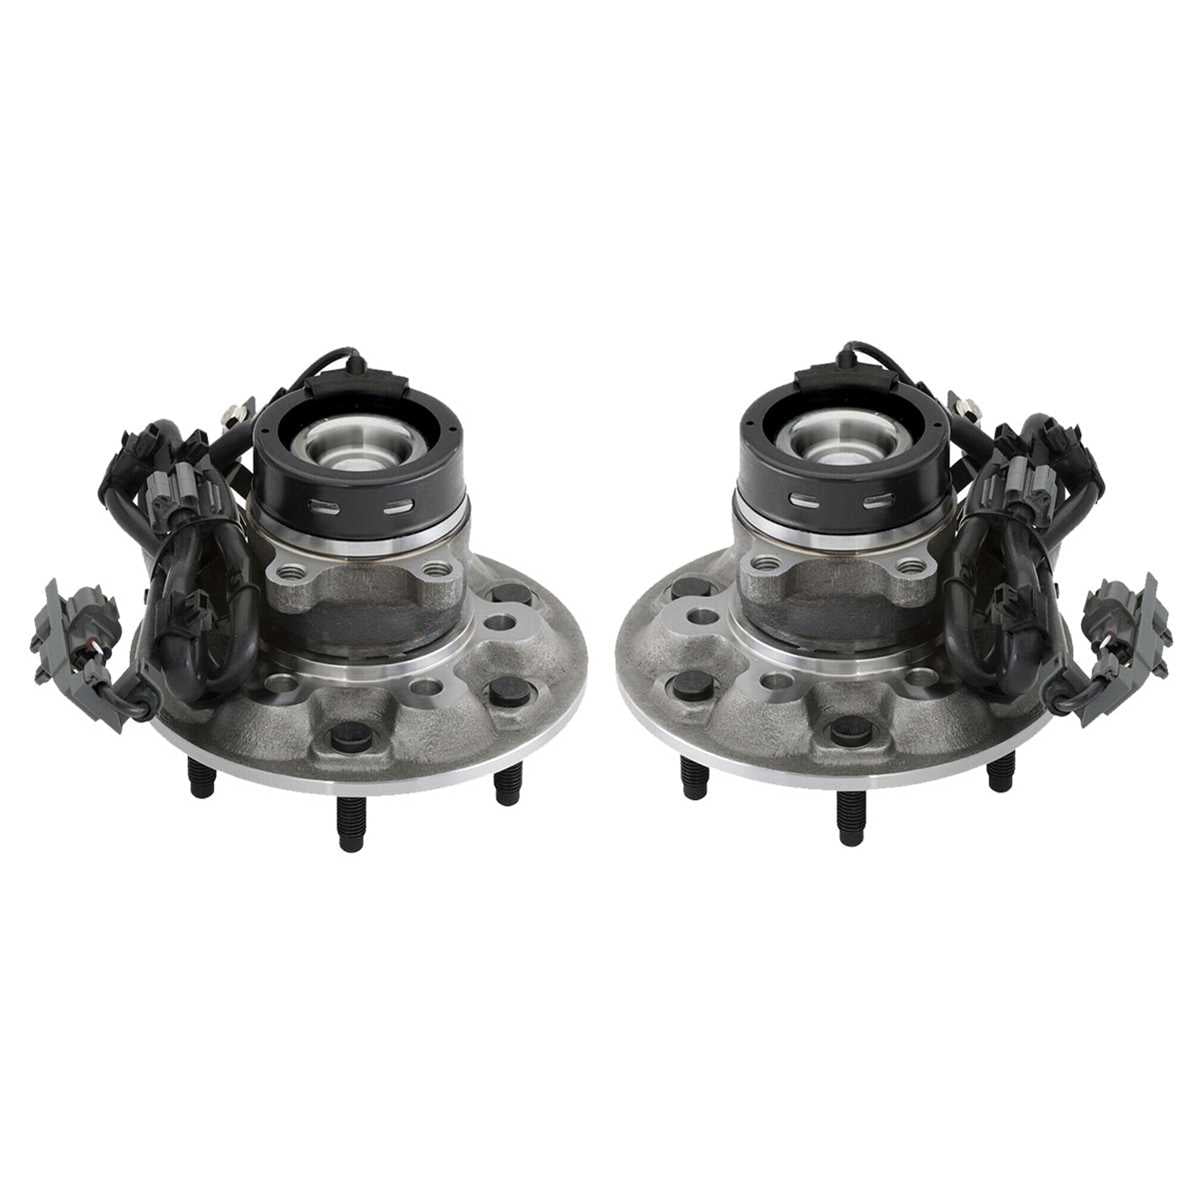 PAIR 4WD Front Wheel Hub Bearing Assembly For 2004-2008 GMC CANYON 